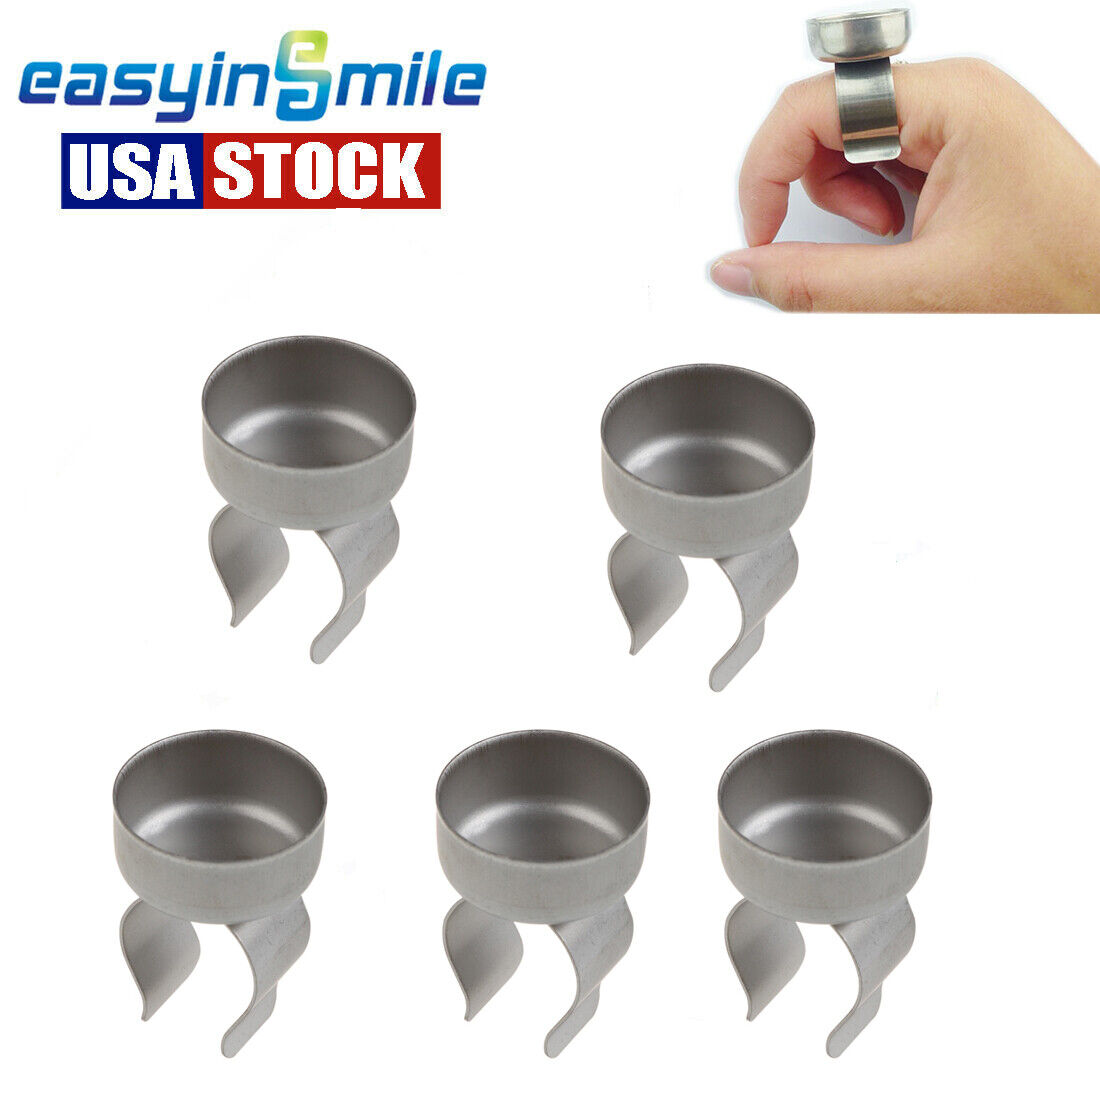 5X Dental Finger Ring Mix Bowl Cup Handy Polish Dish Easyinsmile Stainless Steel